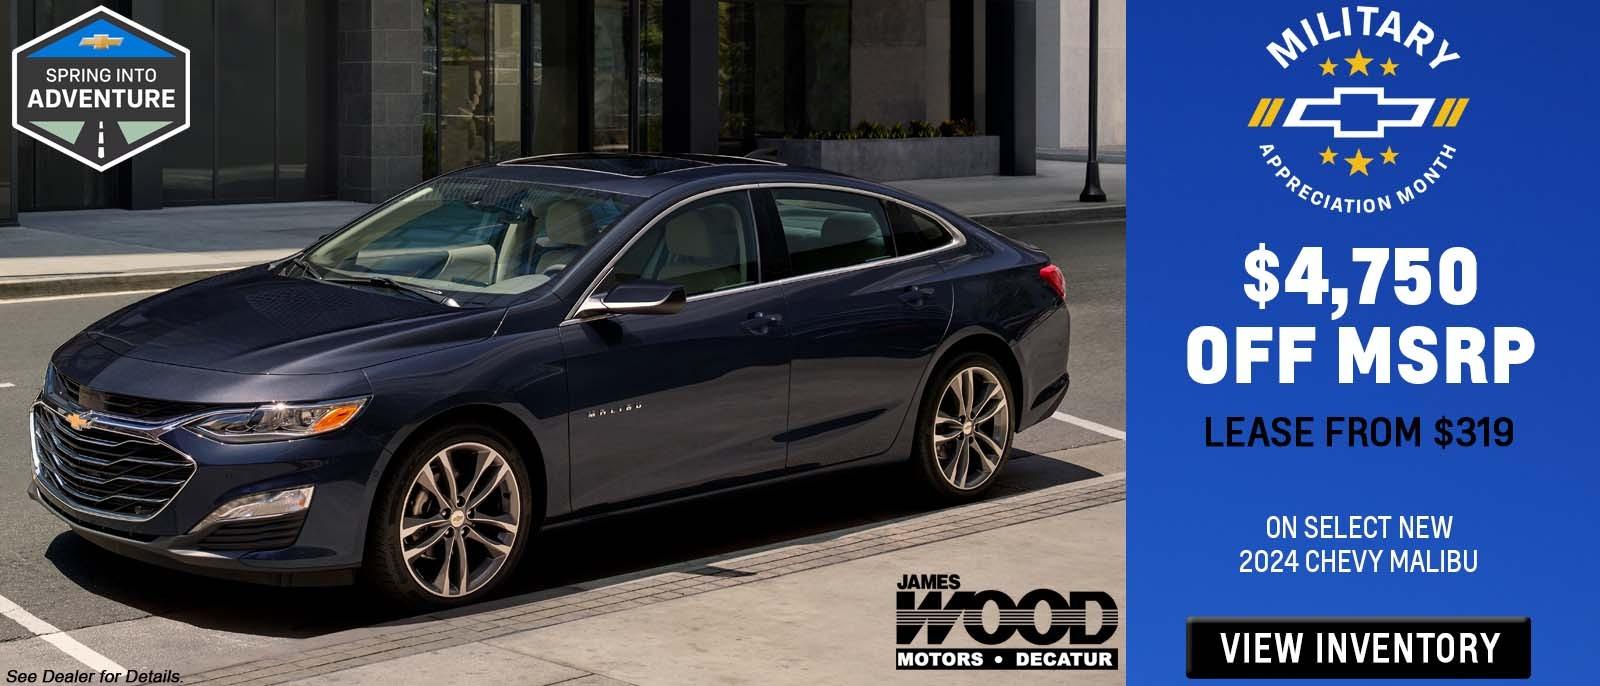 Get $4,750 Off MSRP or Lease from $319 on Select 2024 Chevy Malibu at James Wood Decatur Ft Worth Texas